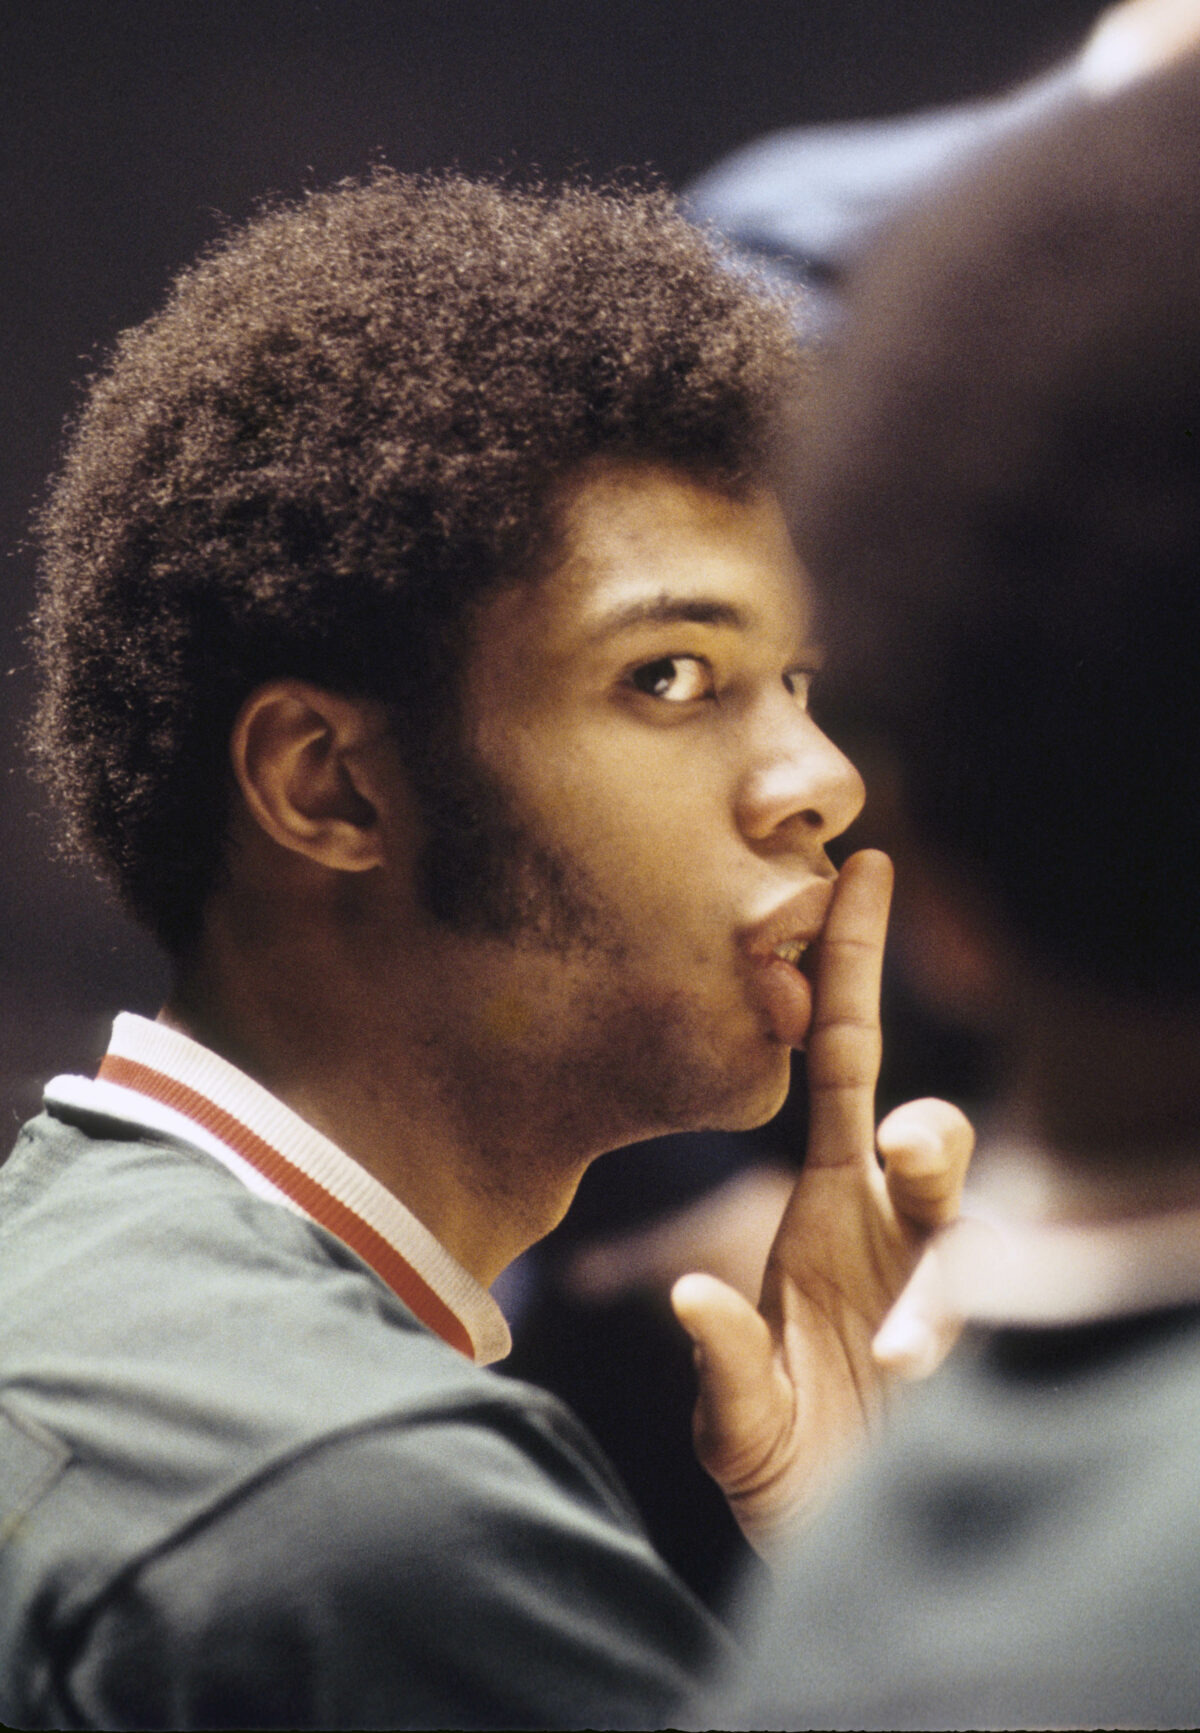 Kareem Abdul-Jabbar turns 75: Looking back at the basketball legend in images